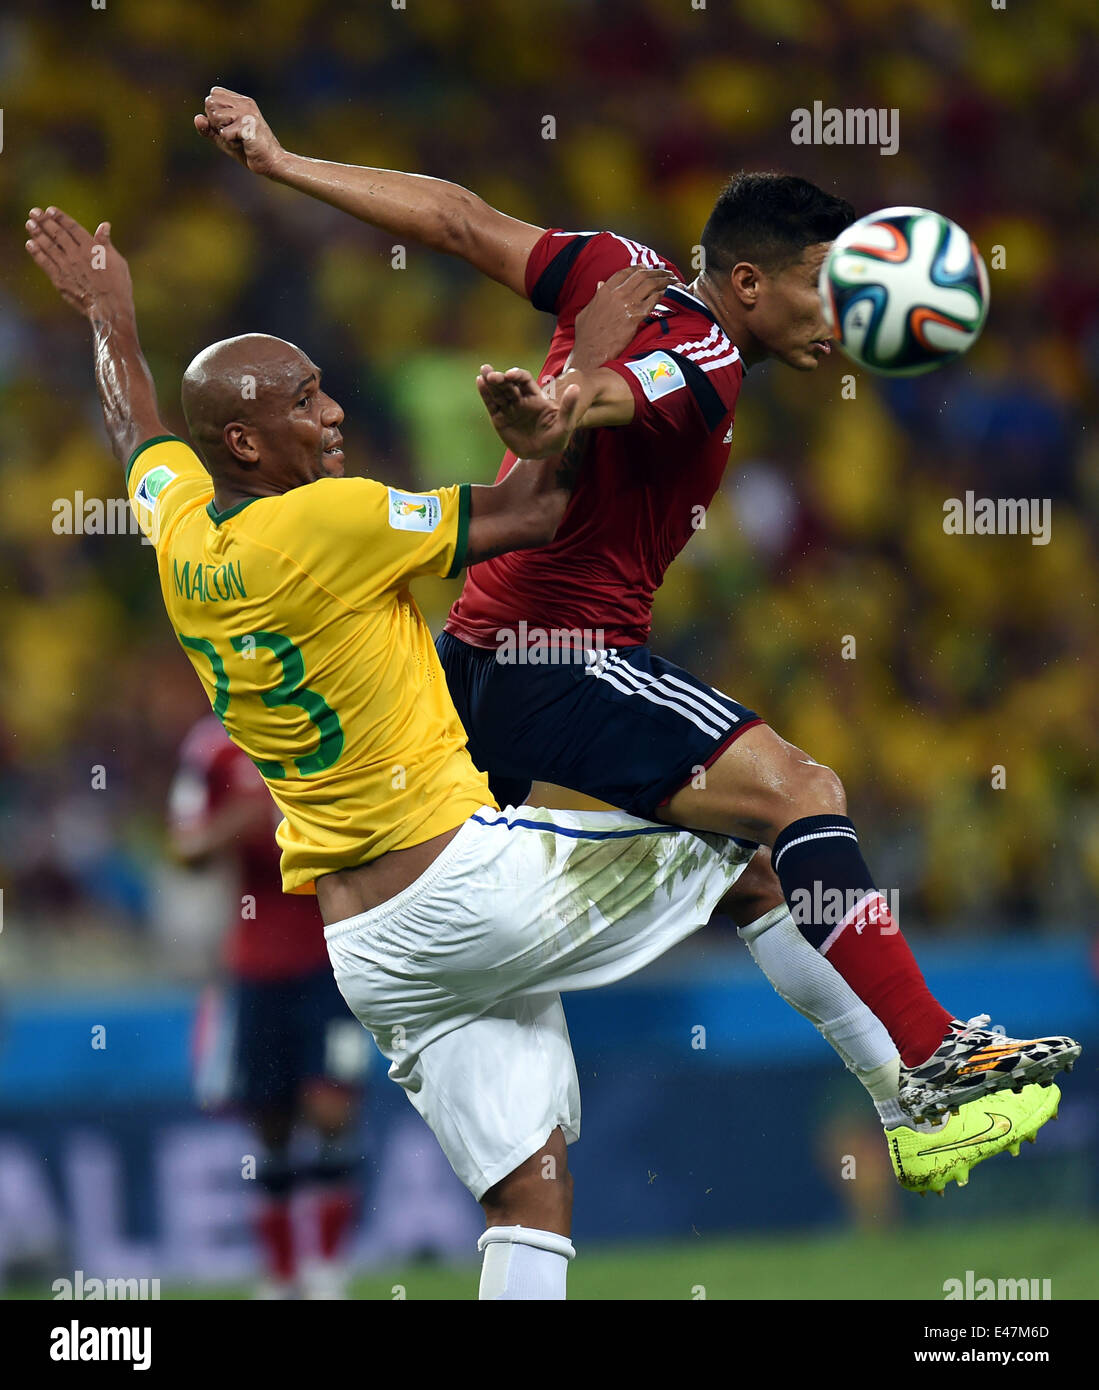 Fortaleza, Brazil. 4th July, 2014. Brazil's Maicon (L) competes during a quarter-finals match between Brazil and Colombia of 2014 FIFA World Cup at the Estadio Castelao Stadium in Fortaleza, Brazil, on July 4, 2014. Credit:  Li Ga/Xinhua/Alamy Live News Stock Photo